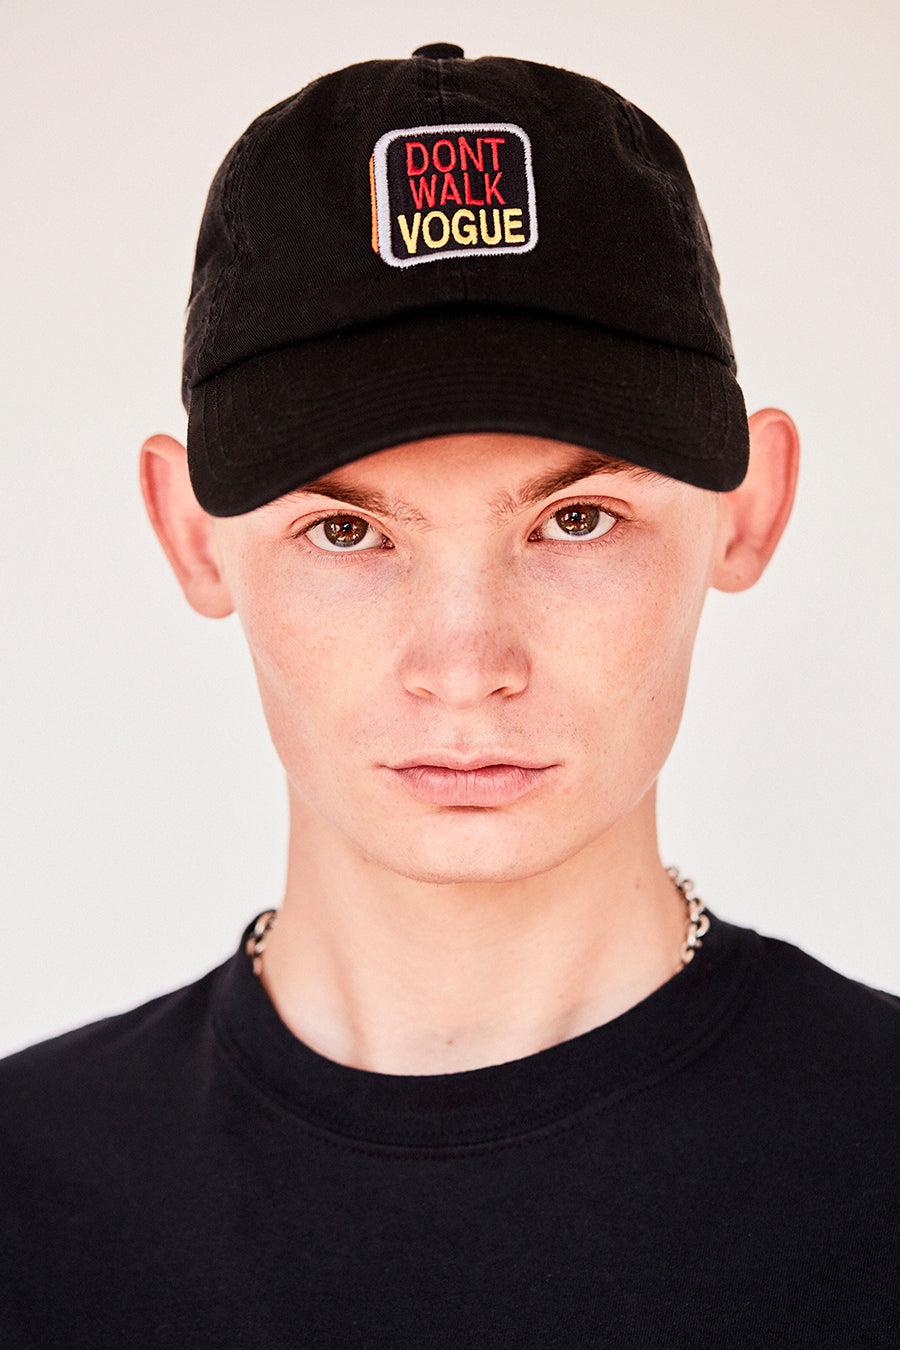 Brand New. New York Label: Stmarksnewyork.com. This Pride Month 2020 - Shop The Dont Walk Vogue baseball cap featuring embroidery inspired by old school Walk/Dont Walk crosswalk signs. Embroidered in New York with love